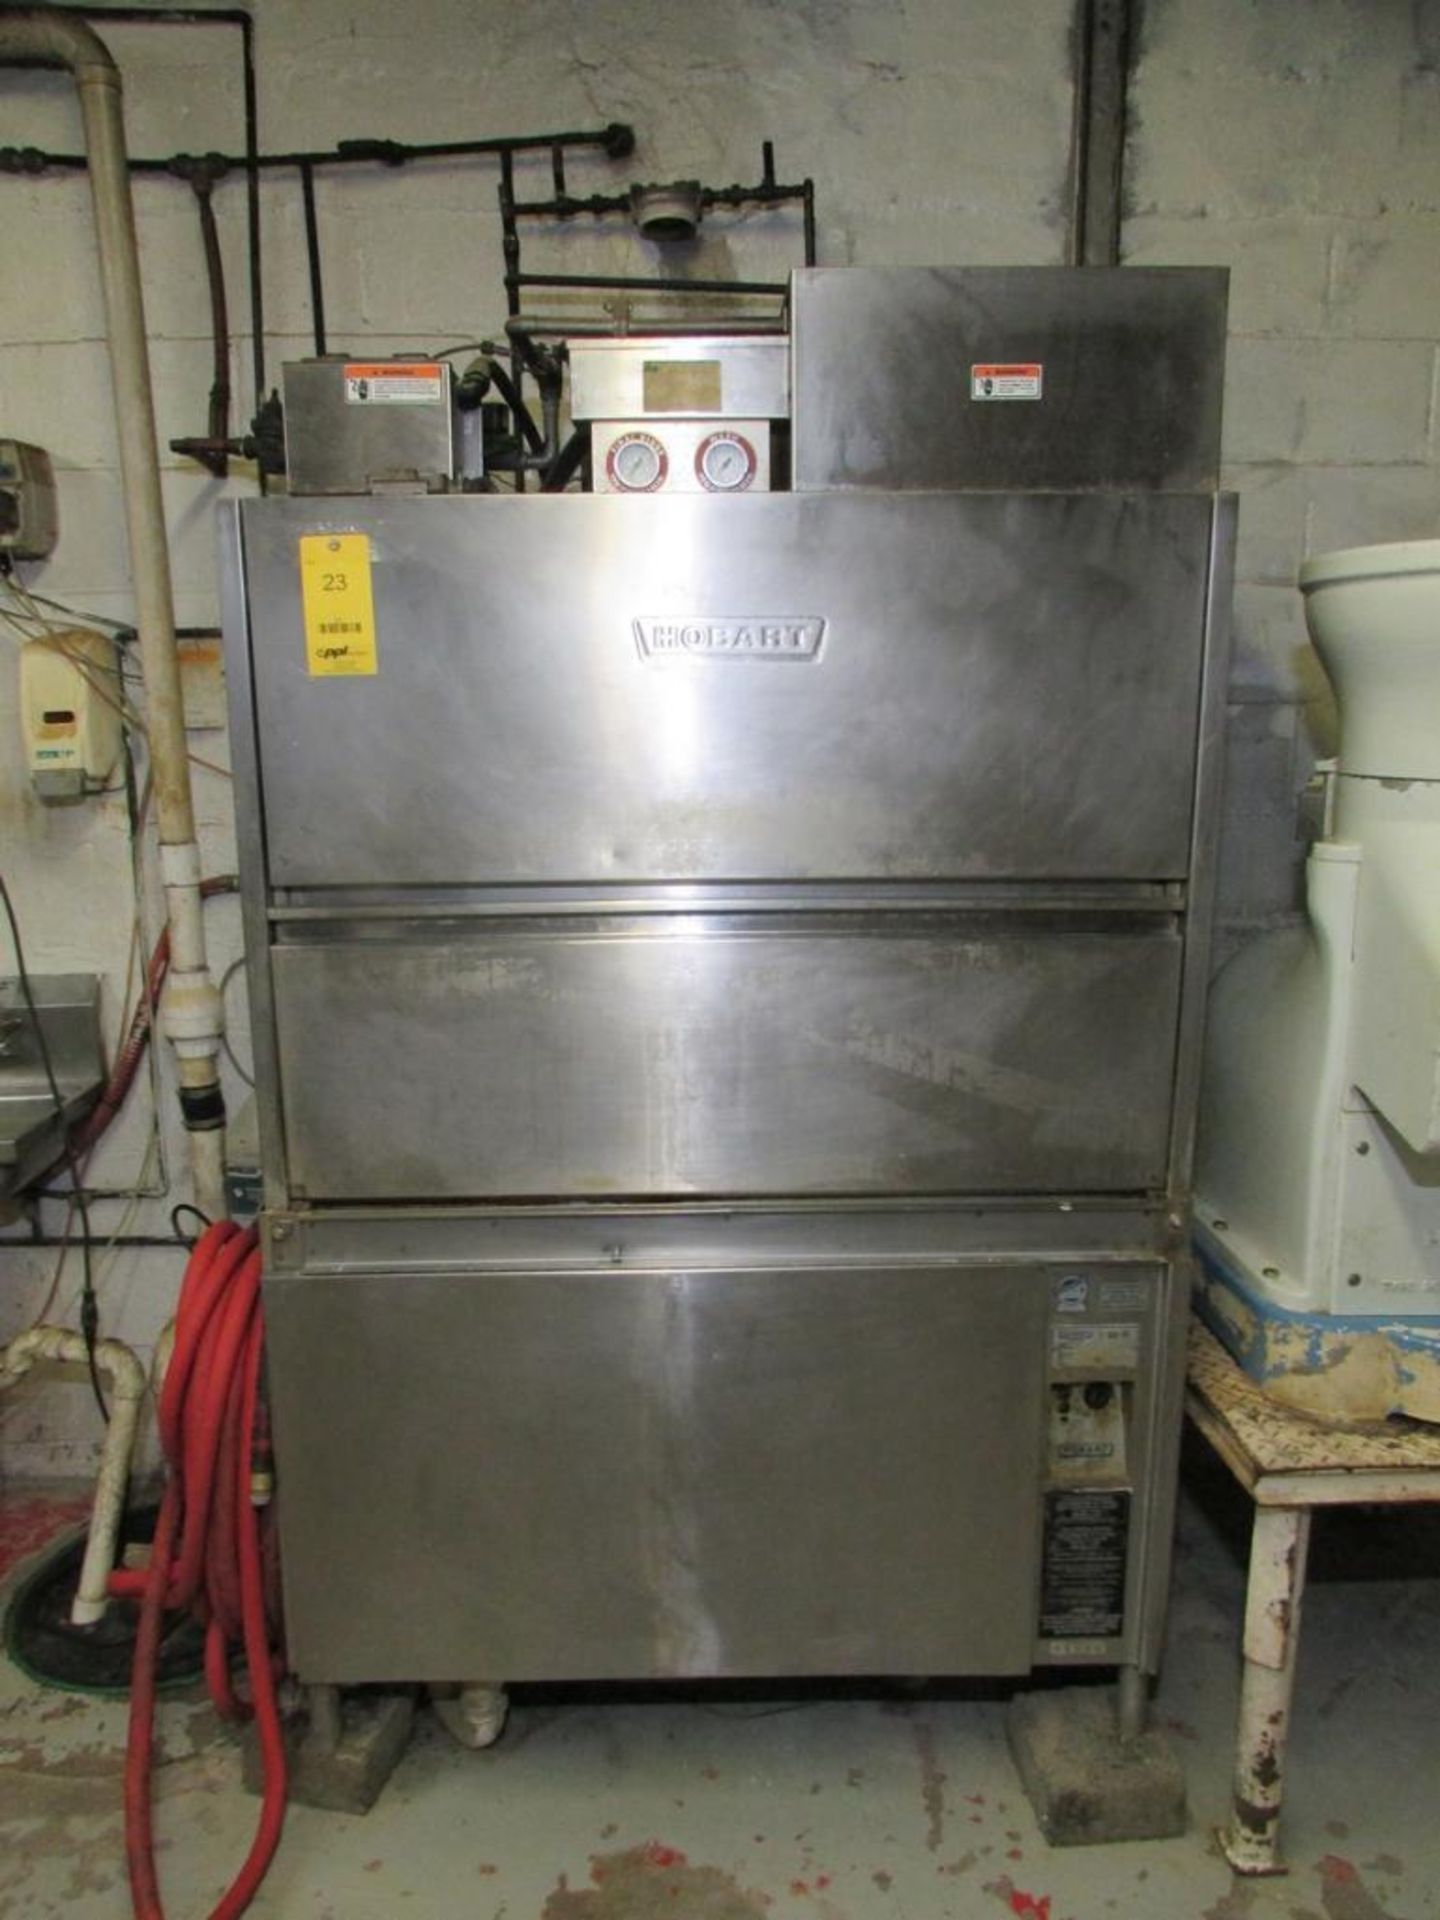 Hobart UW50 Commercial Dishwasher. Wash and Rinse Cycles. 40"x24" Wash Tray, Approx 40"x24"x24" Wash - Image 2 of 11